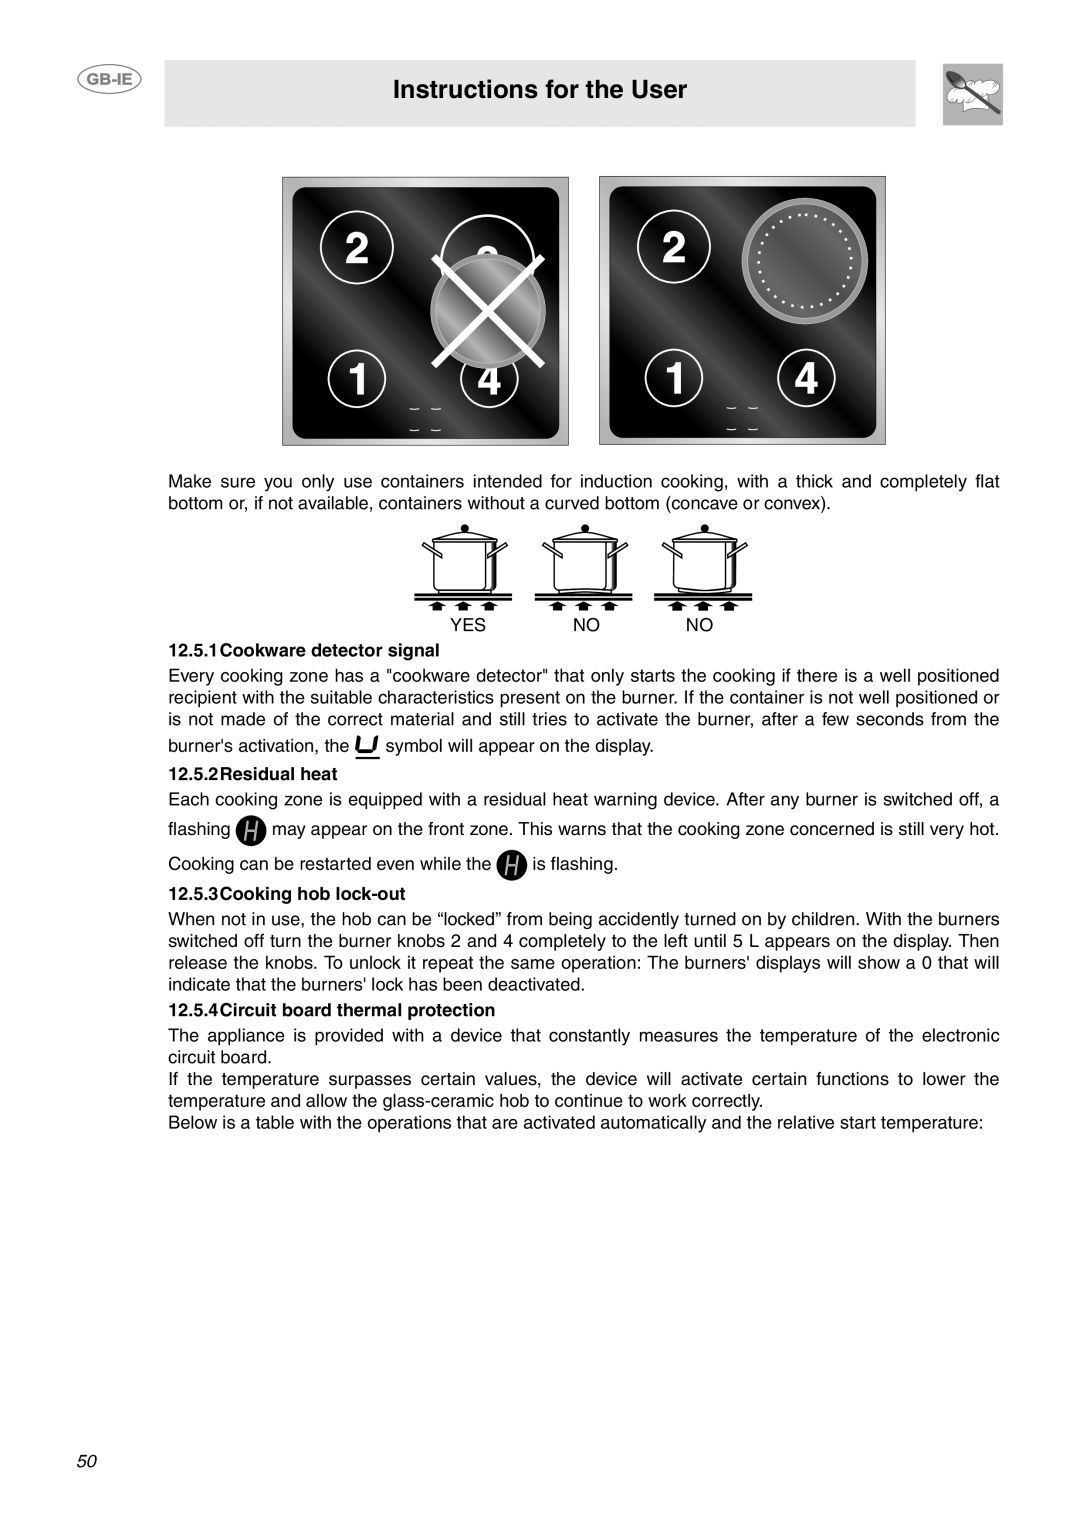 Smeg CE6IMX Instructions for the User, 12.5.1Cookware detector signal, 12.5.2Residual heat, 12.5.3Cooking hob lock-out 